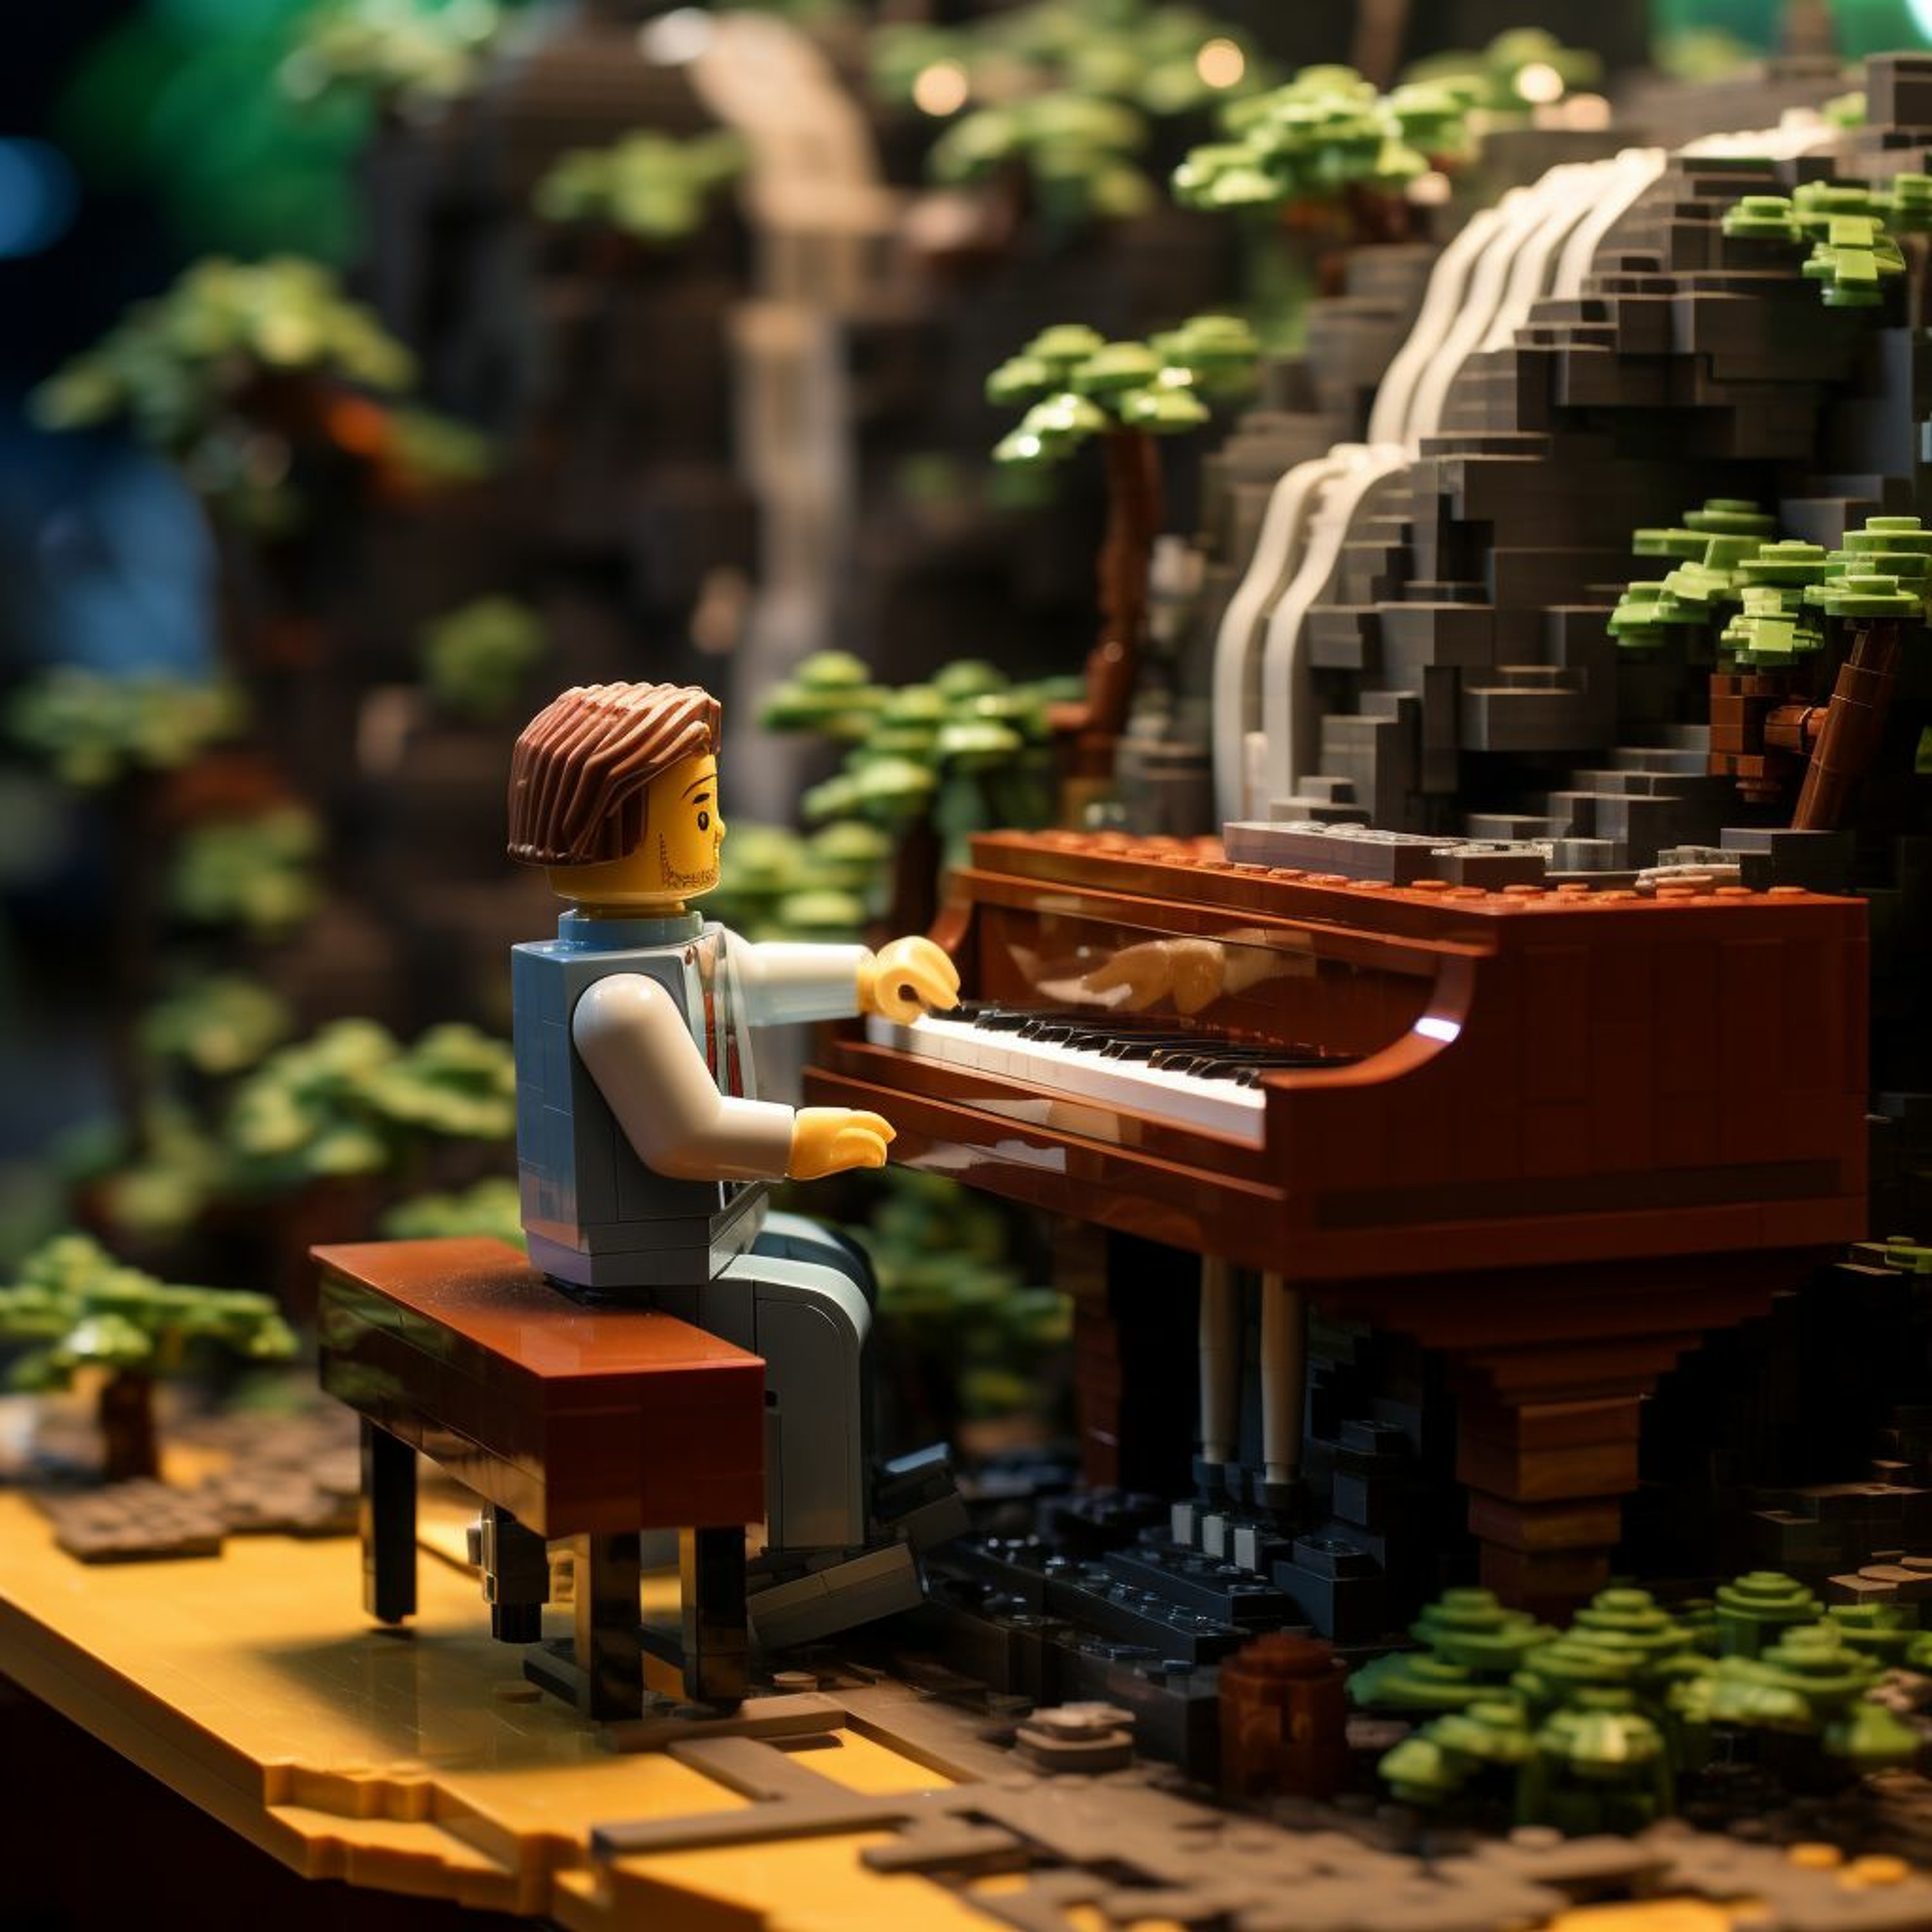 052_ Interview: the way of jazz | a Lego brick standard